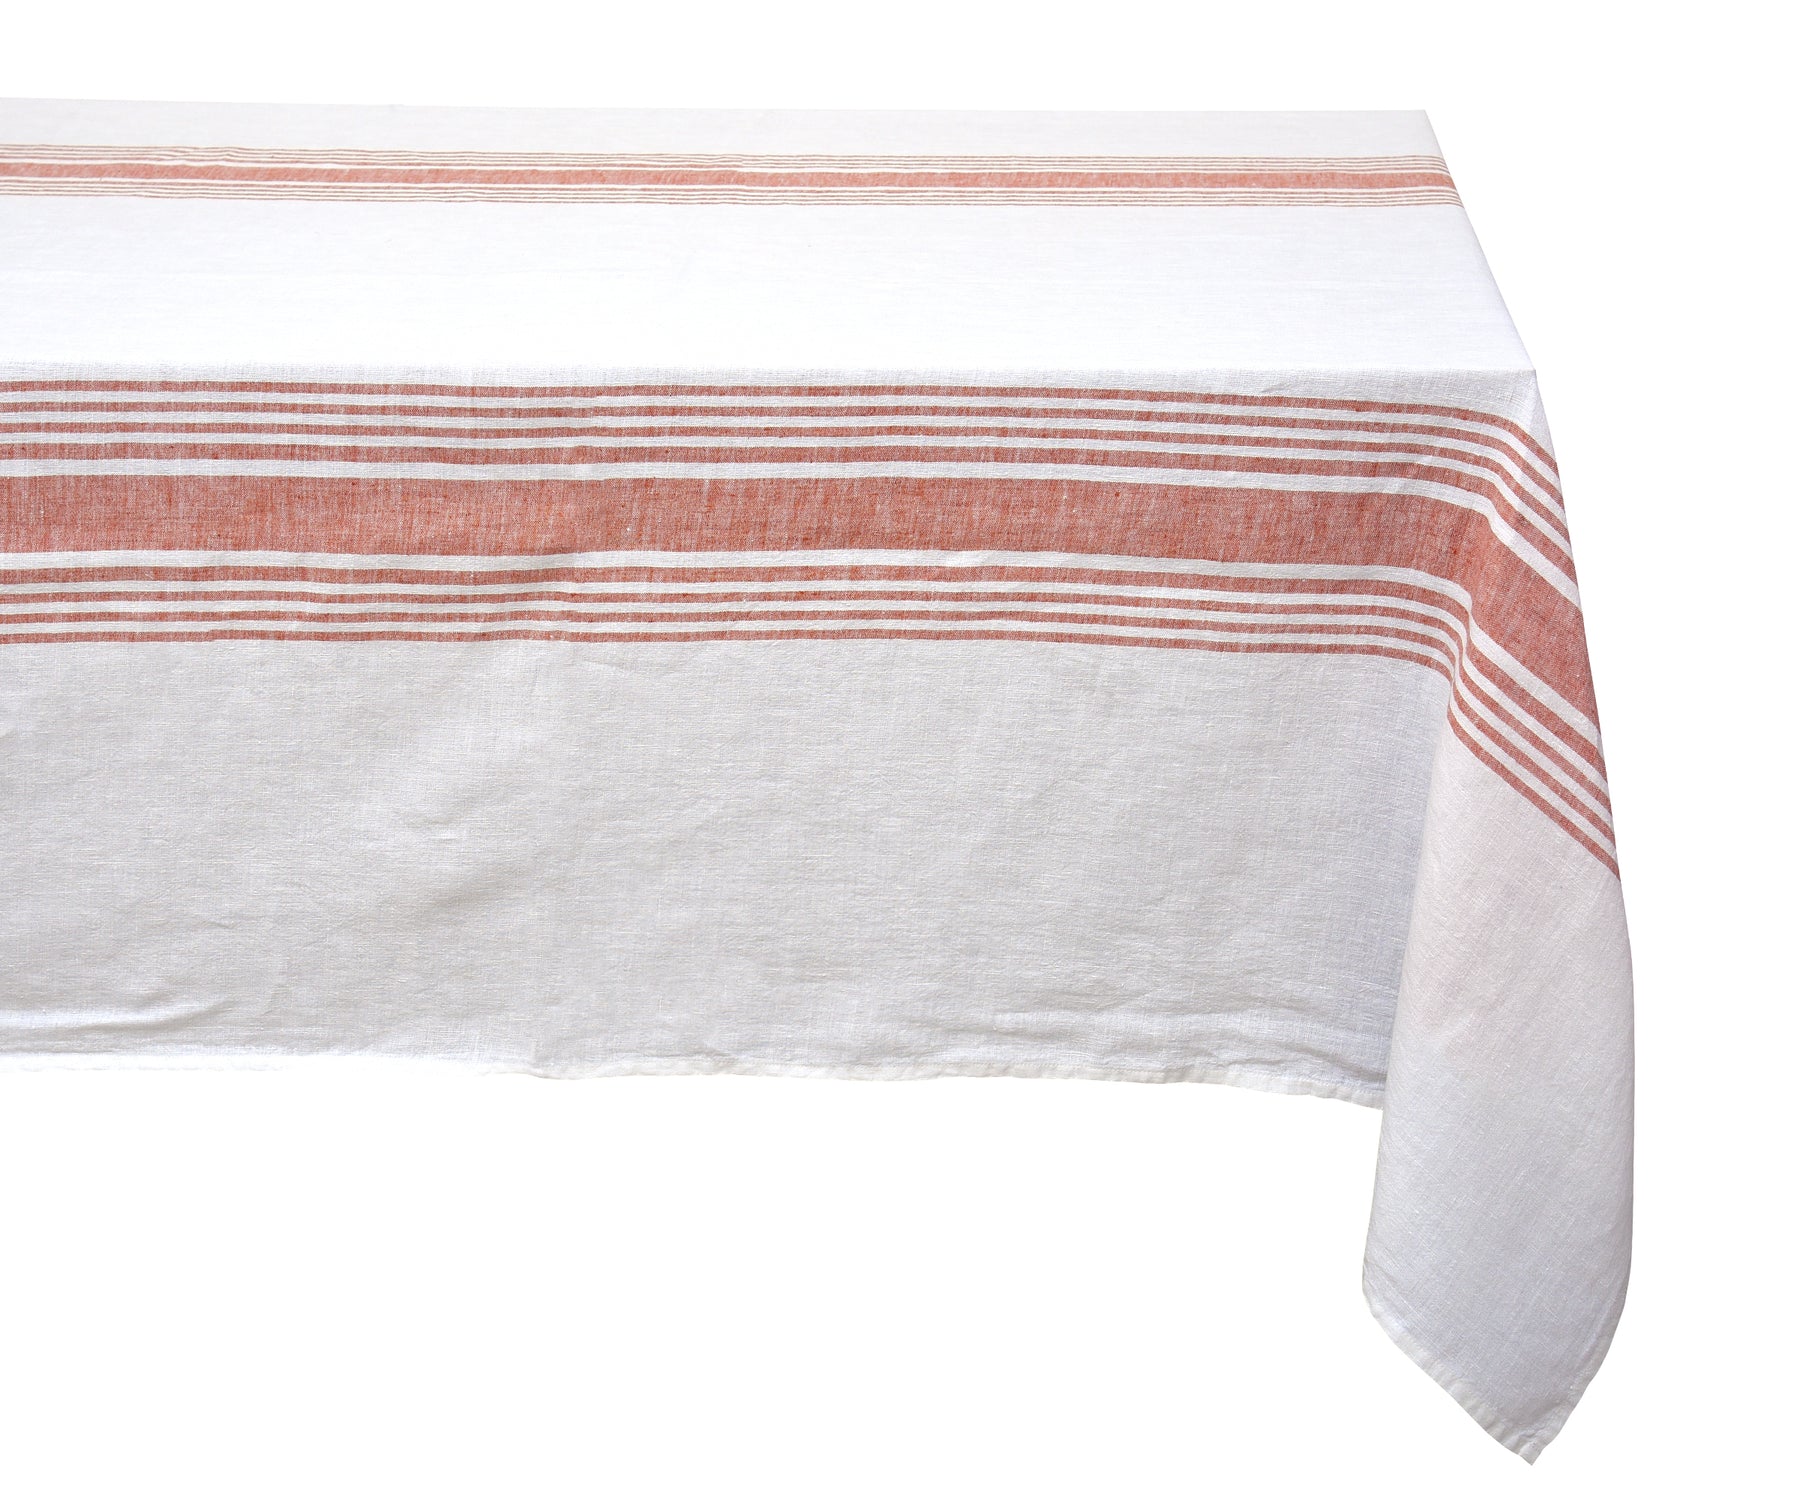 White linen tablecloth with a crisp, fresh appearance